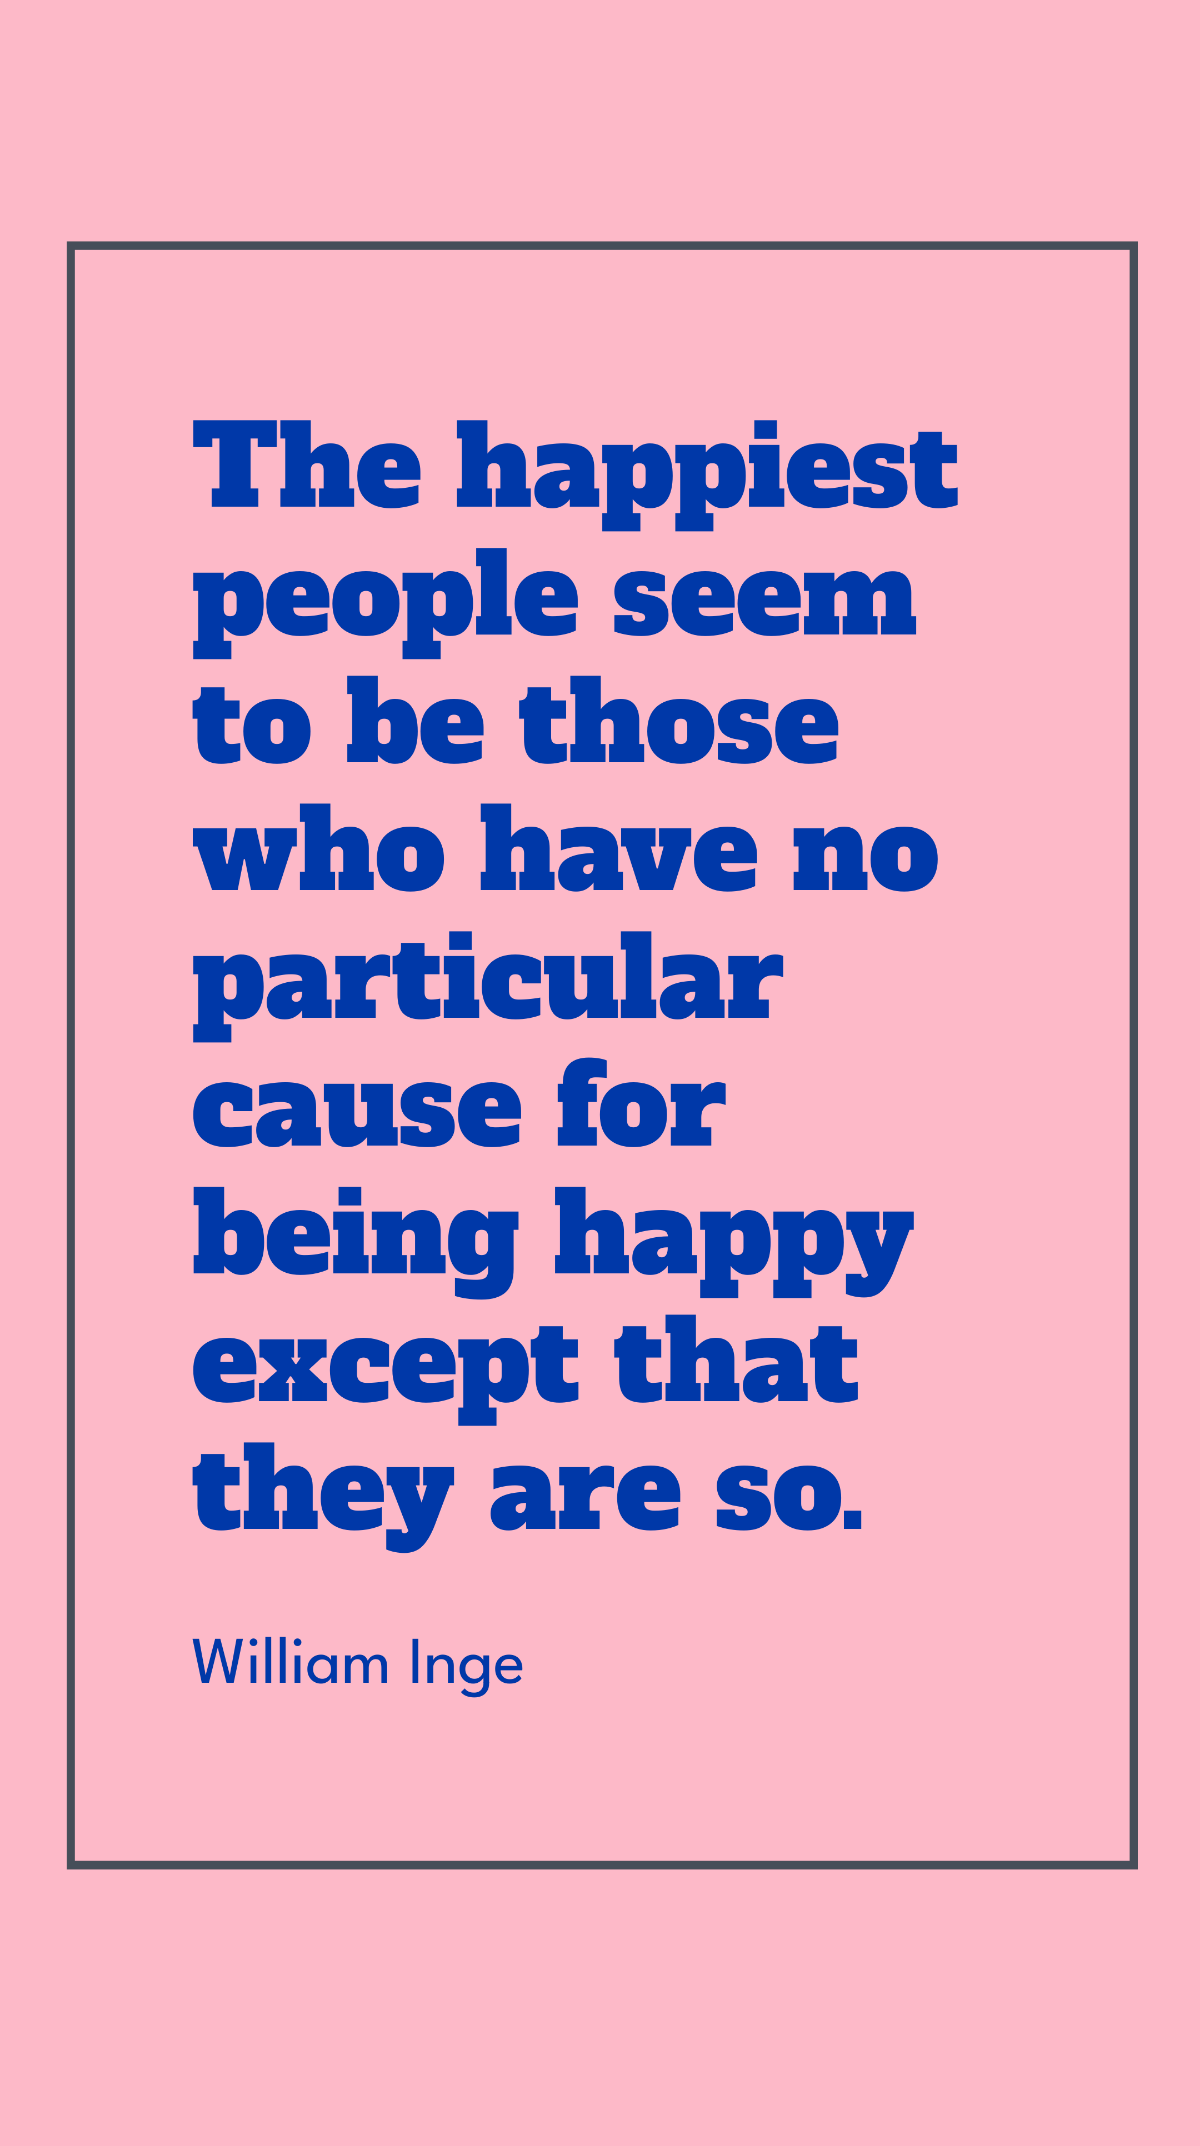 William Inge - The happiest people seem to be those who have no particular cause for being happy except that they are so. Template